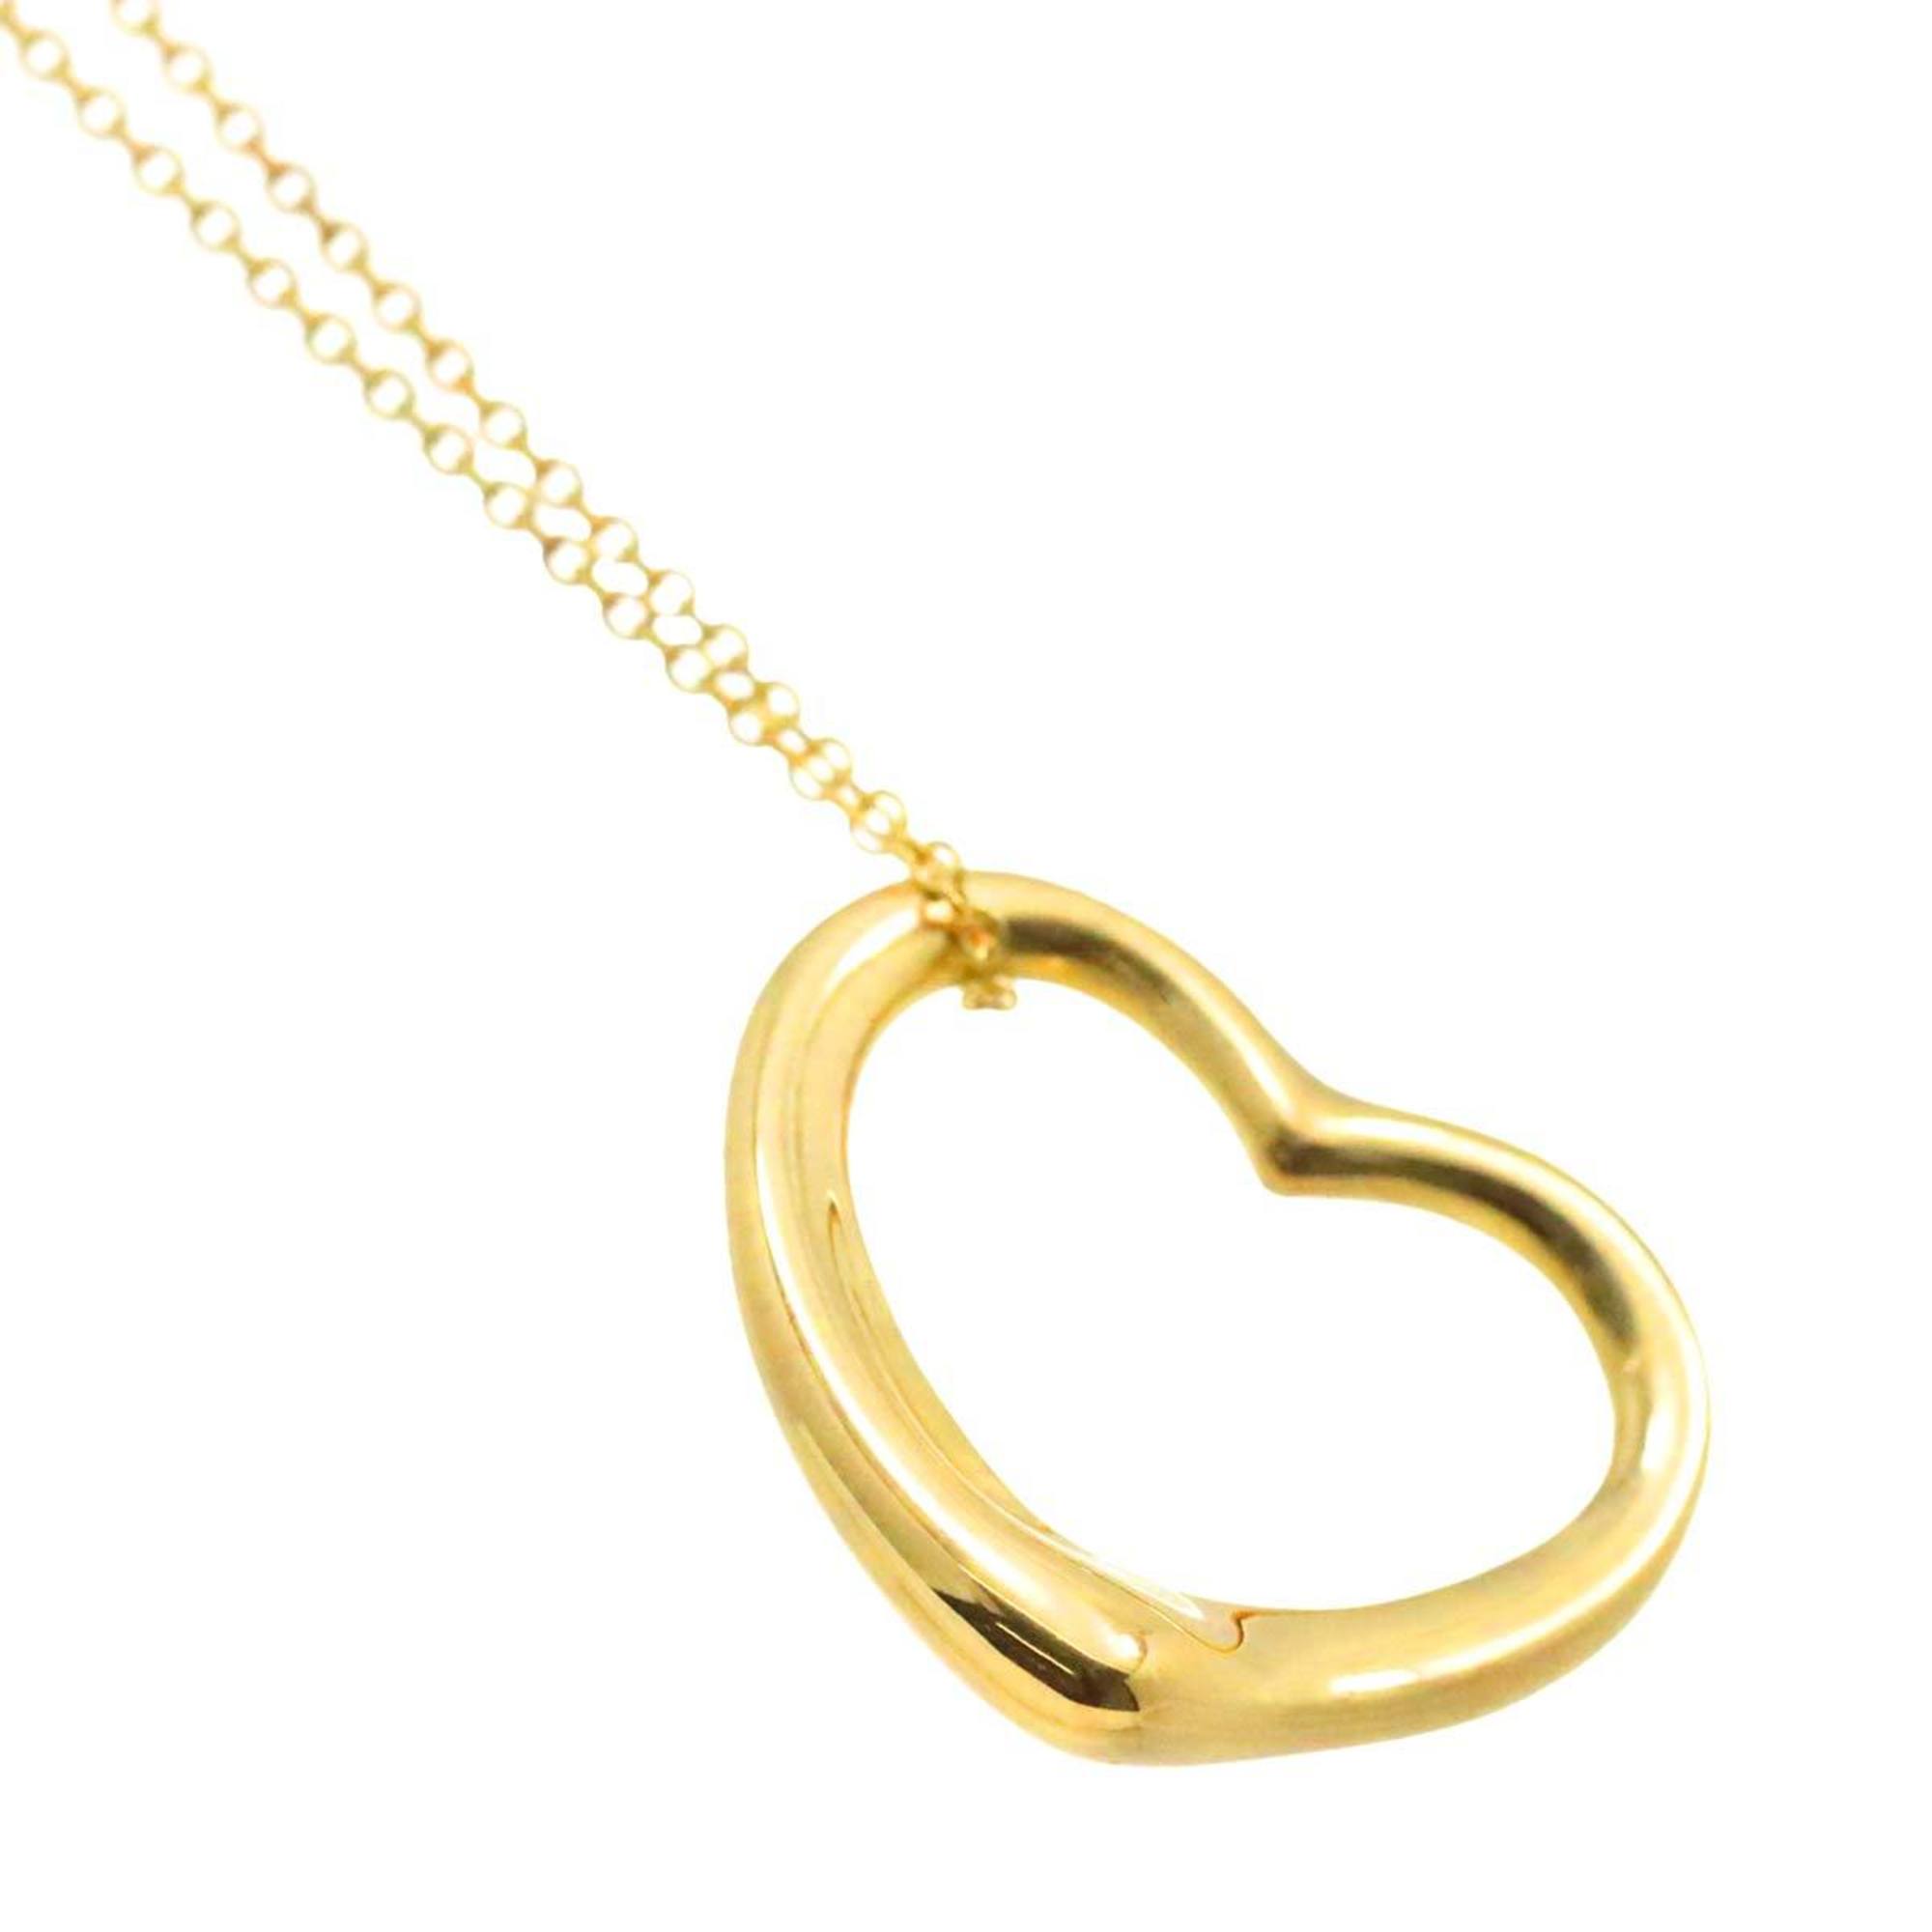 Tiffany & Co. Heart 22mm Necklace 41cm K18 YG Yellow Gold 750 Open